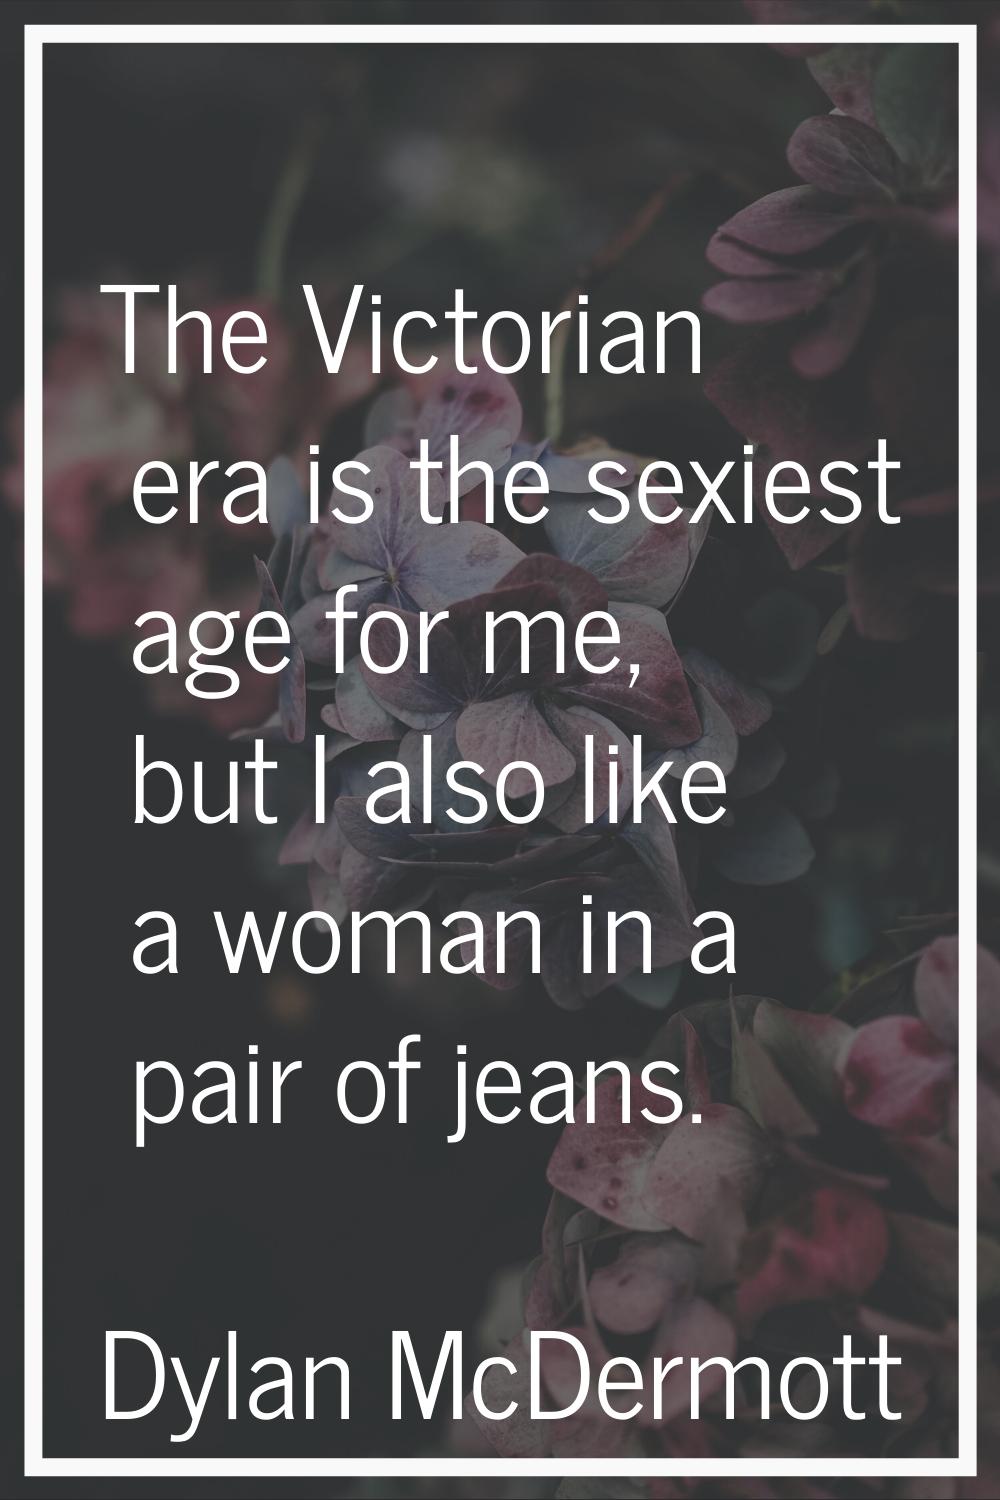 The Victorian era is the sexiest age for me, but I also like a woman in a pair of jeans.